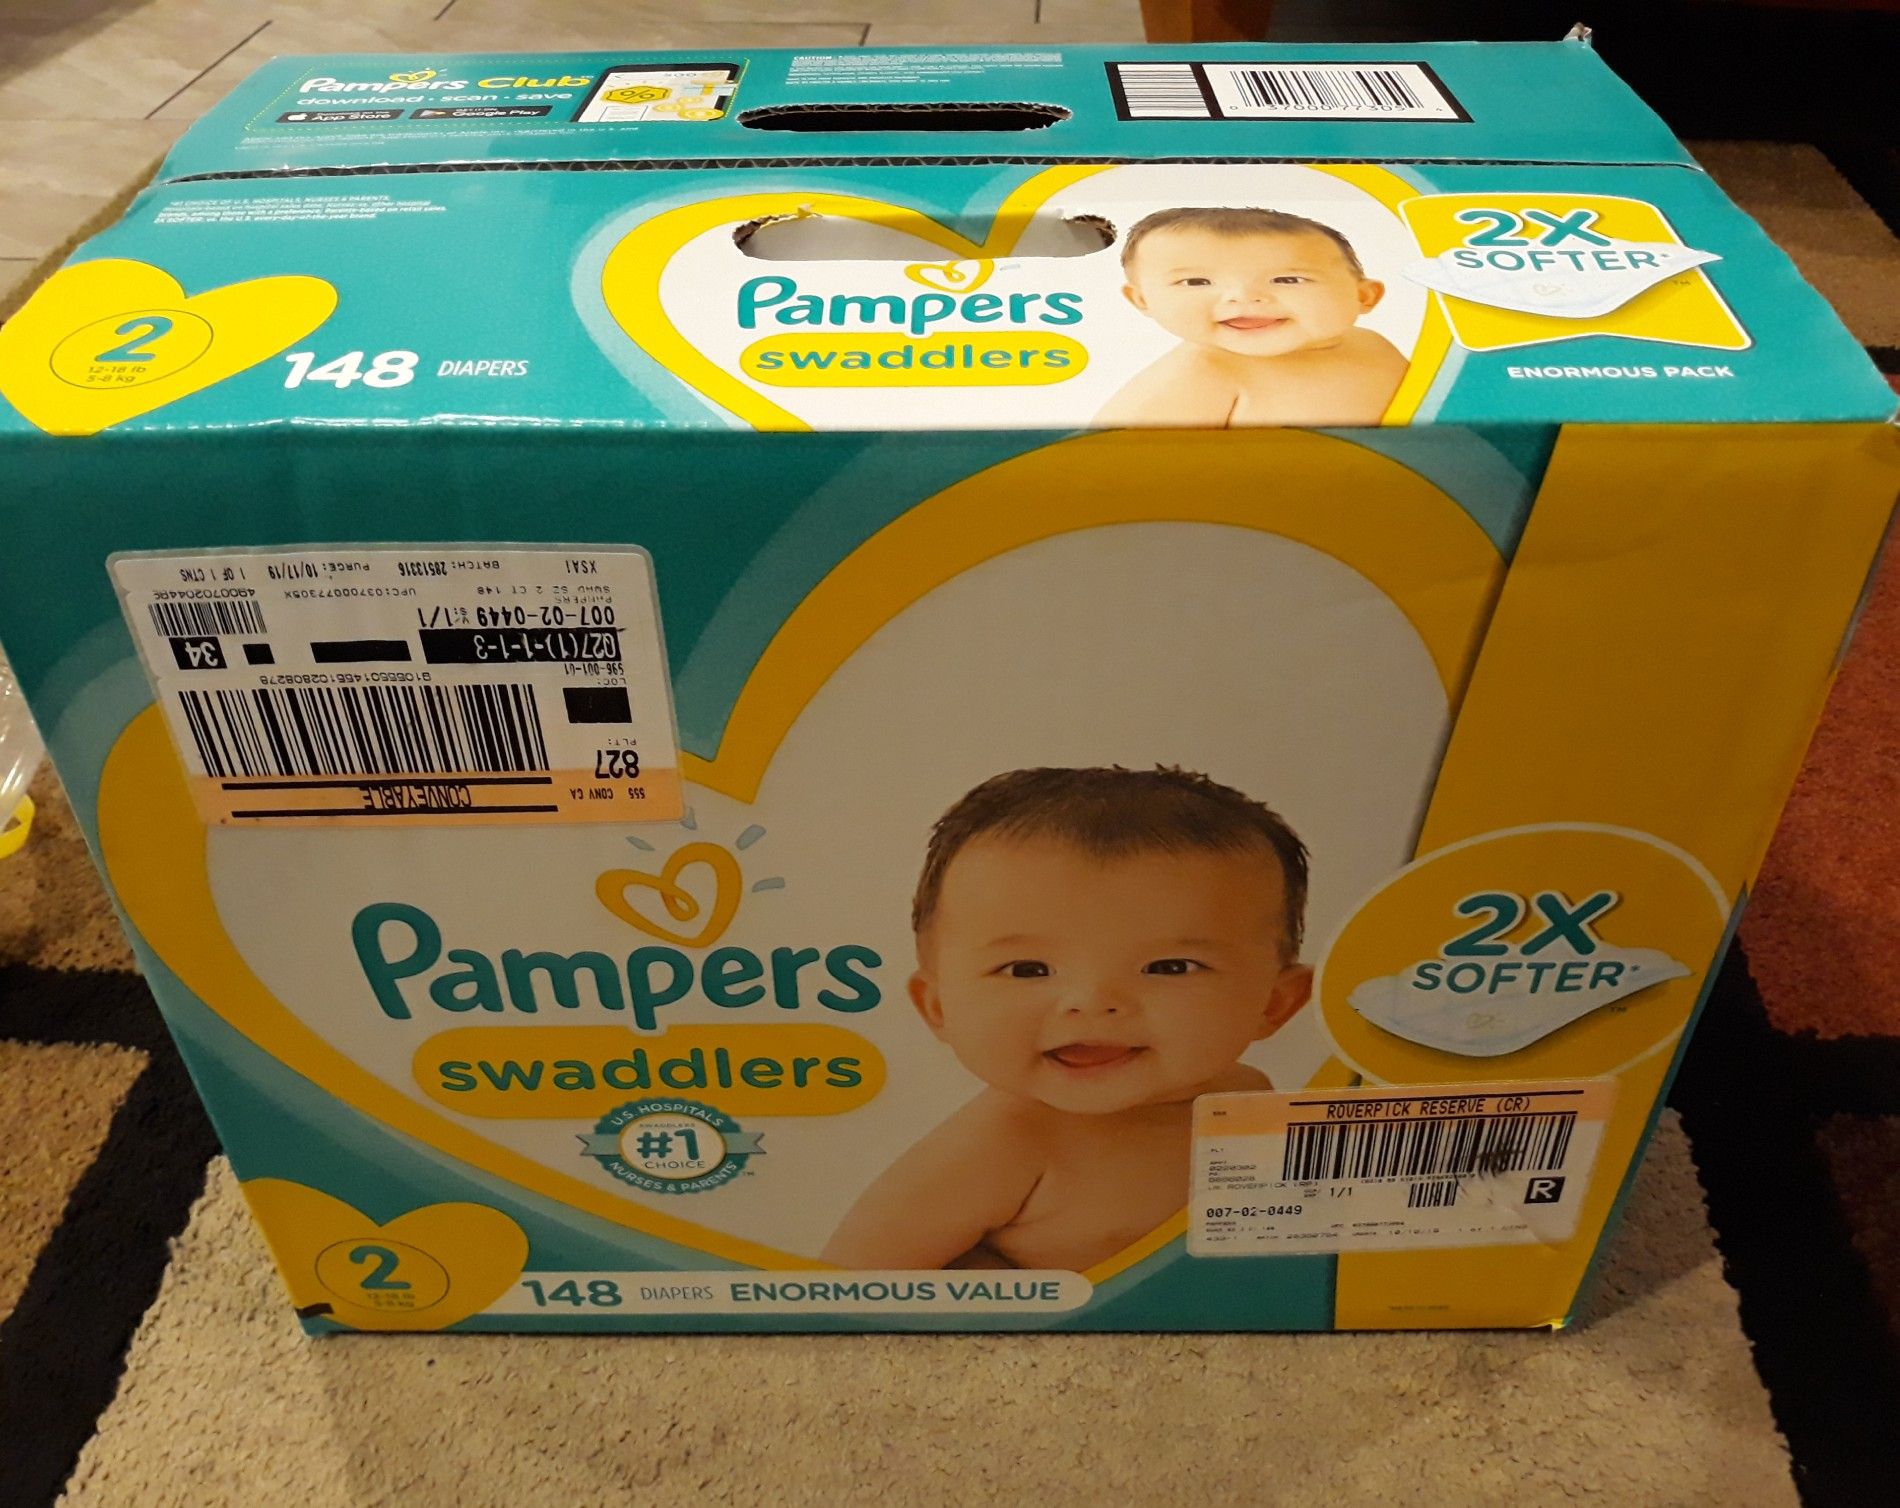 Pampers diapers size 2 👶 (148 count) Box unopened (Offers will be ignored) ‼Caja nueva de Pampers Size 2 👉Recoger en Vallejo👈